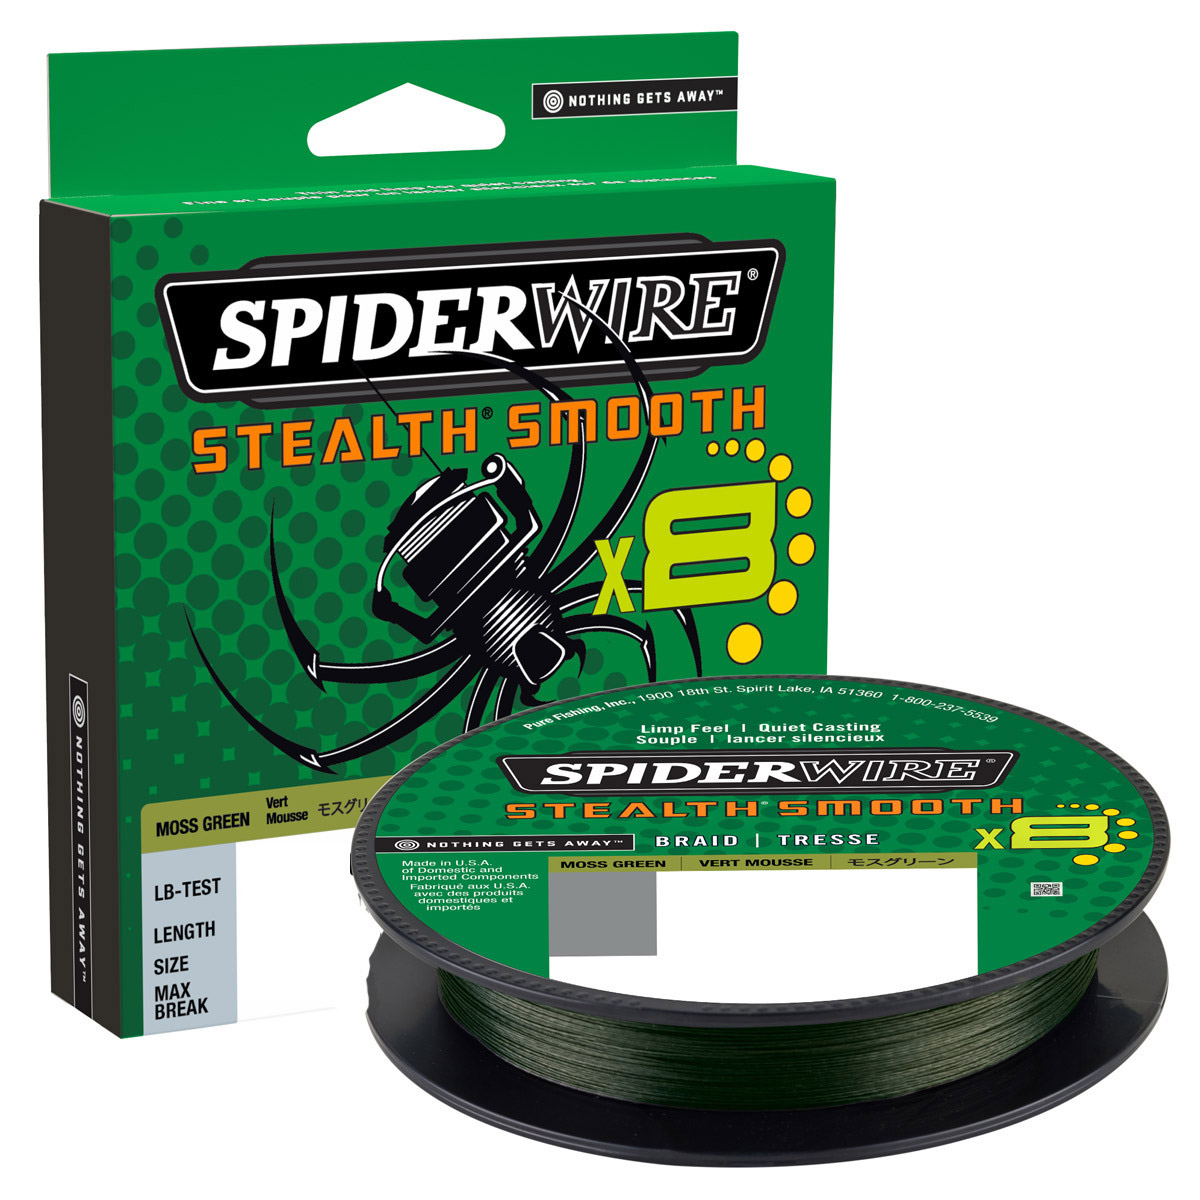 Spiderwire Stealth Smooth 8 Moss Green 300 M